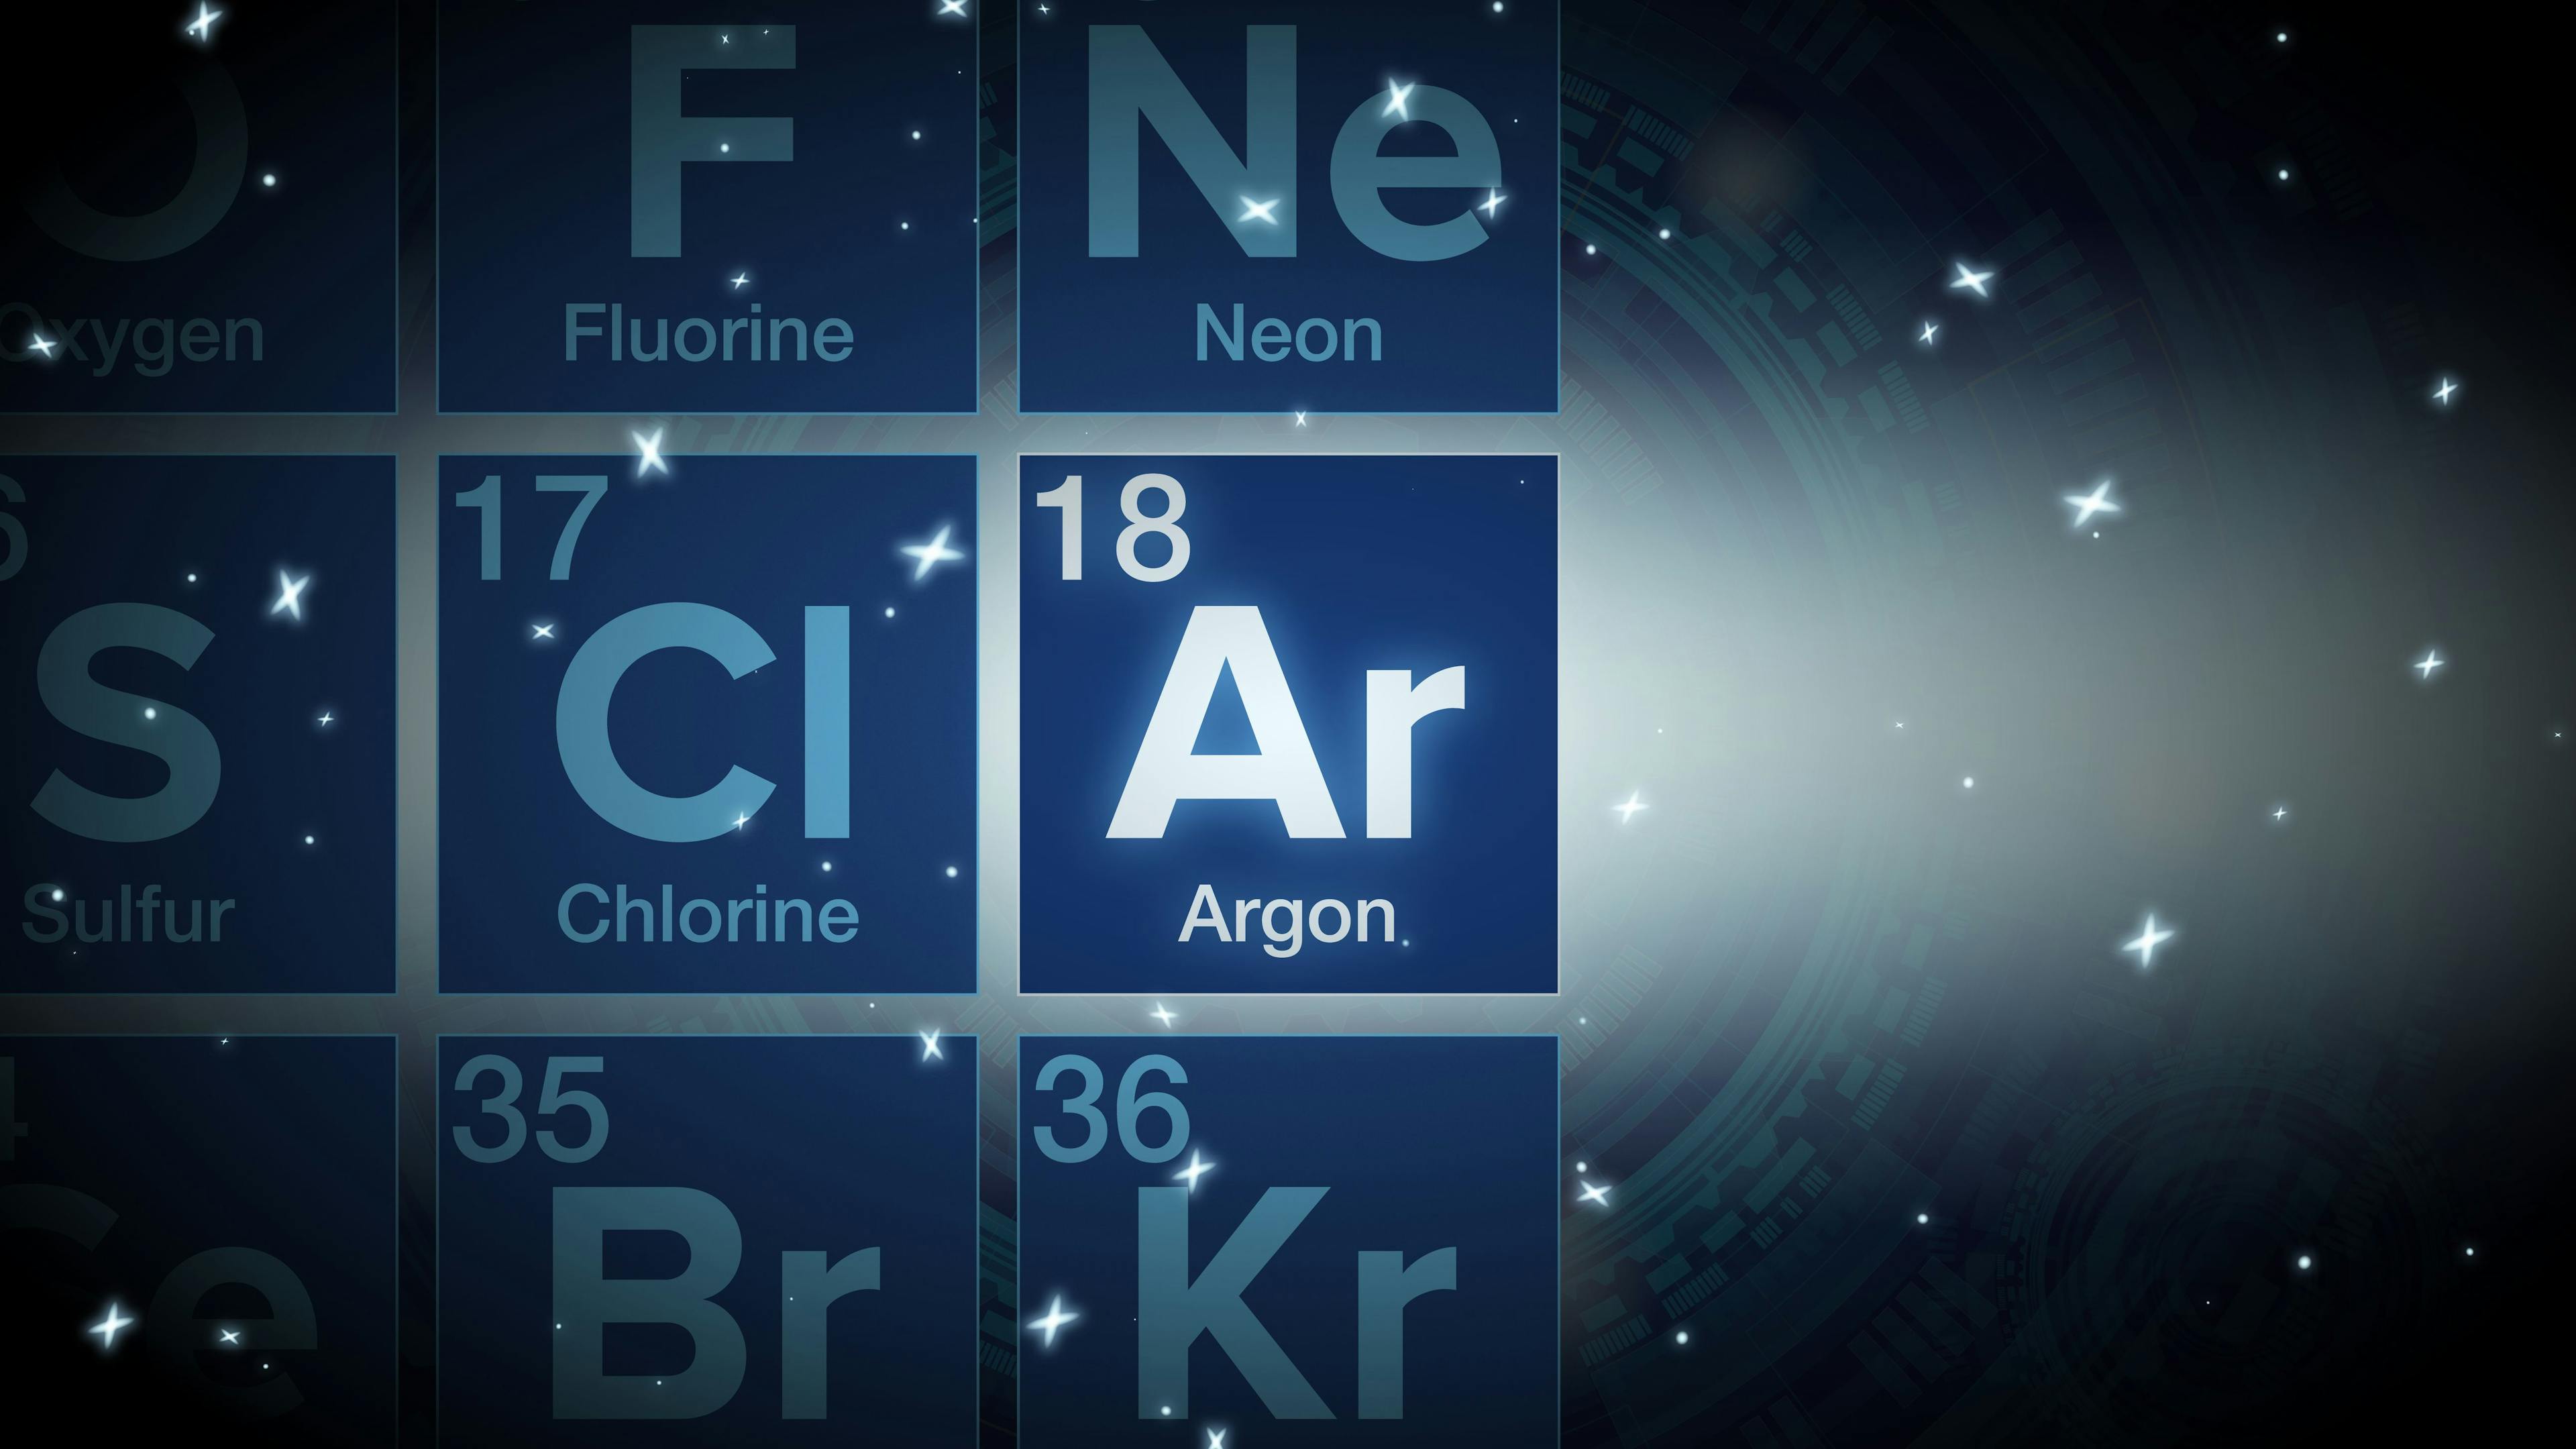 Close up of the Argon symbol in the periodic table, tech space environment. | Image Credit: © Tom - stock.adobe.com